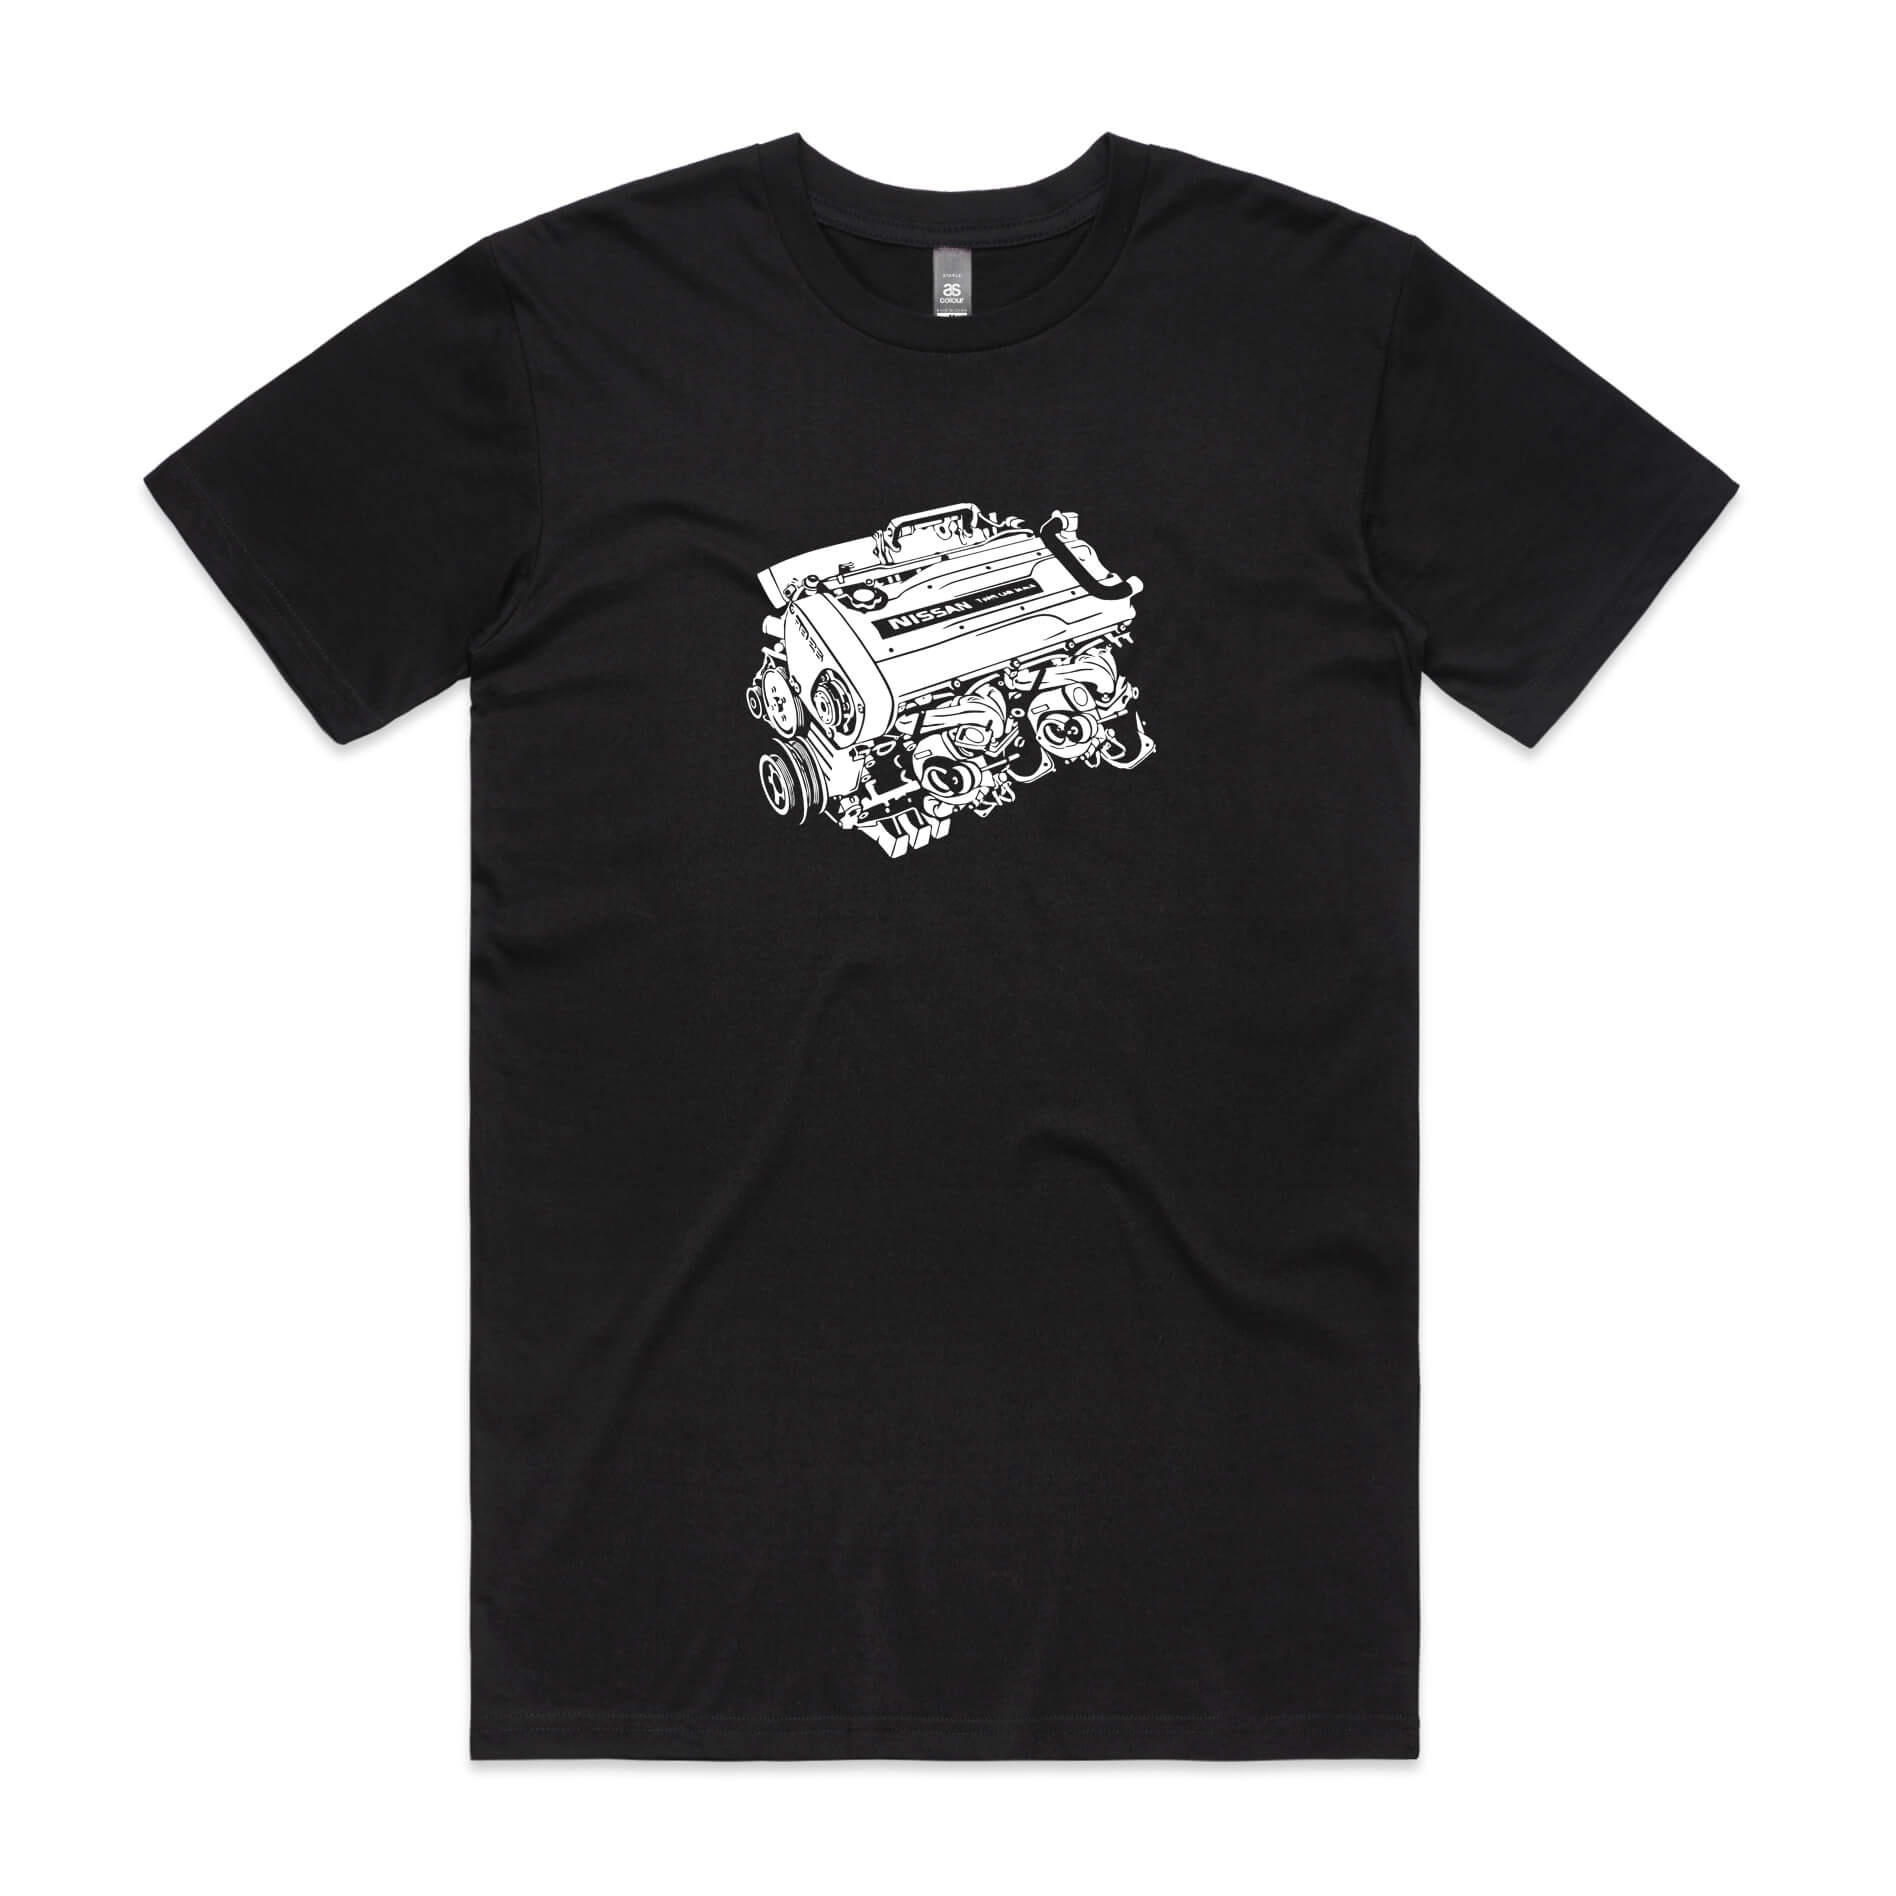 Black T-shirt featuring a detailed white silhouette graphic of the Nissan RB26DETT engine on the chest area.